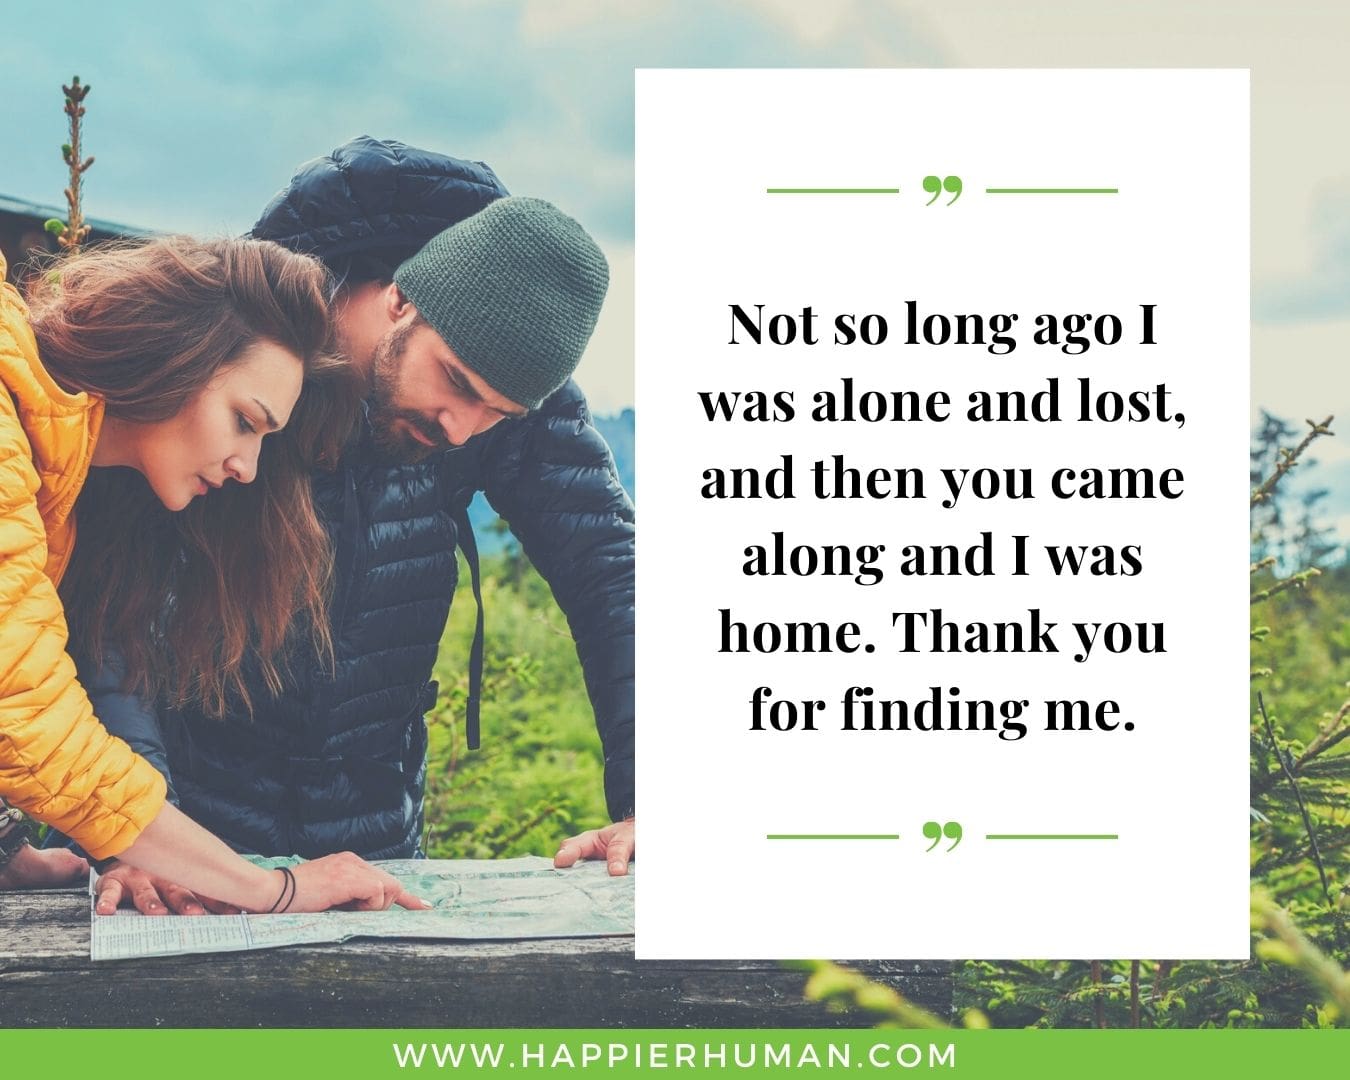 Strong relationship quotes - “Not so long ago I was alone and lost, and then you came along and I was home. Thank you for finding me.”